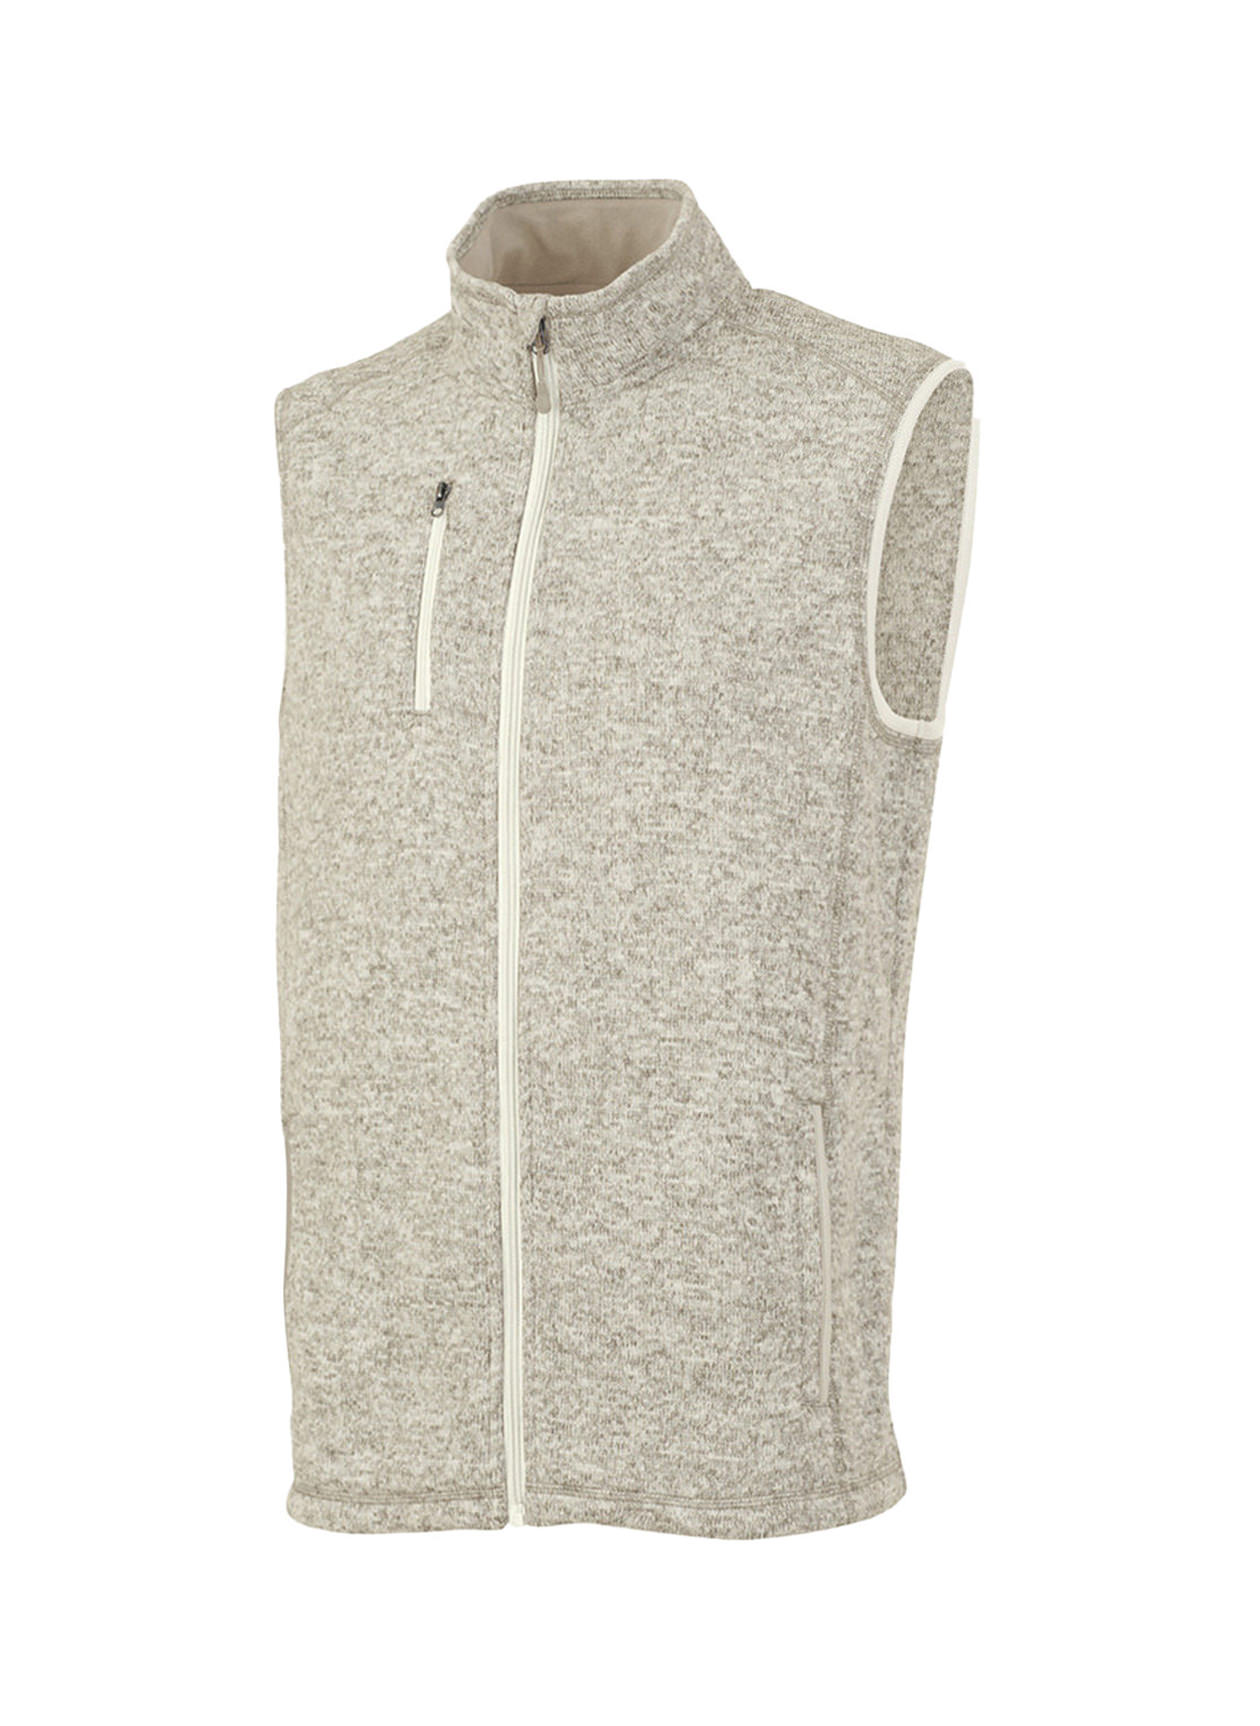 Charles River Men's Oatmeal Heather Pacific Heathered Vest